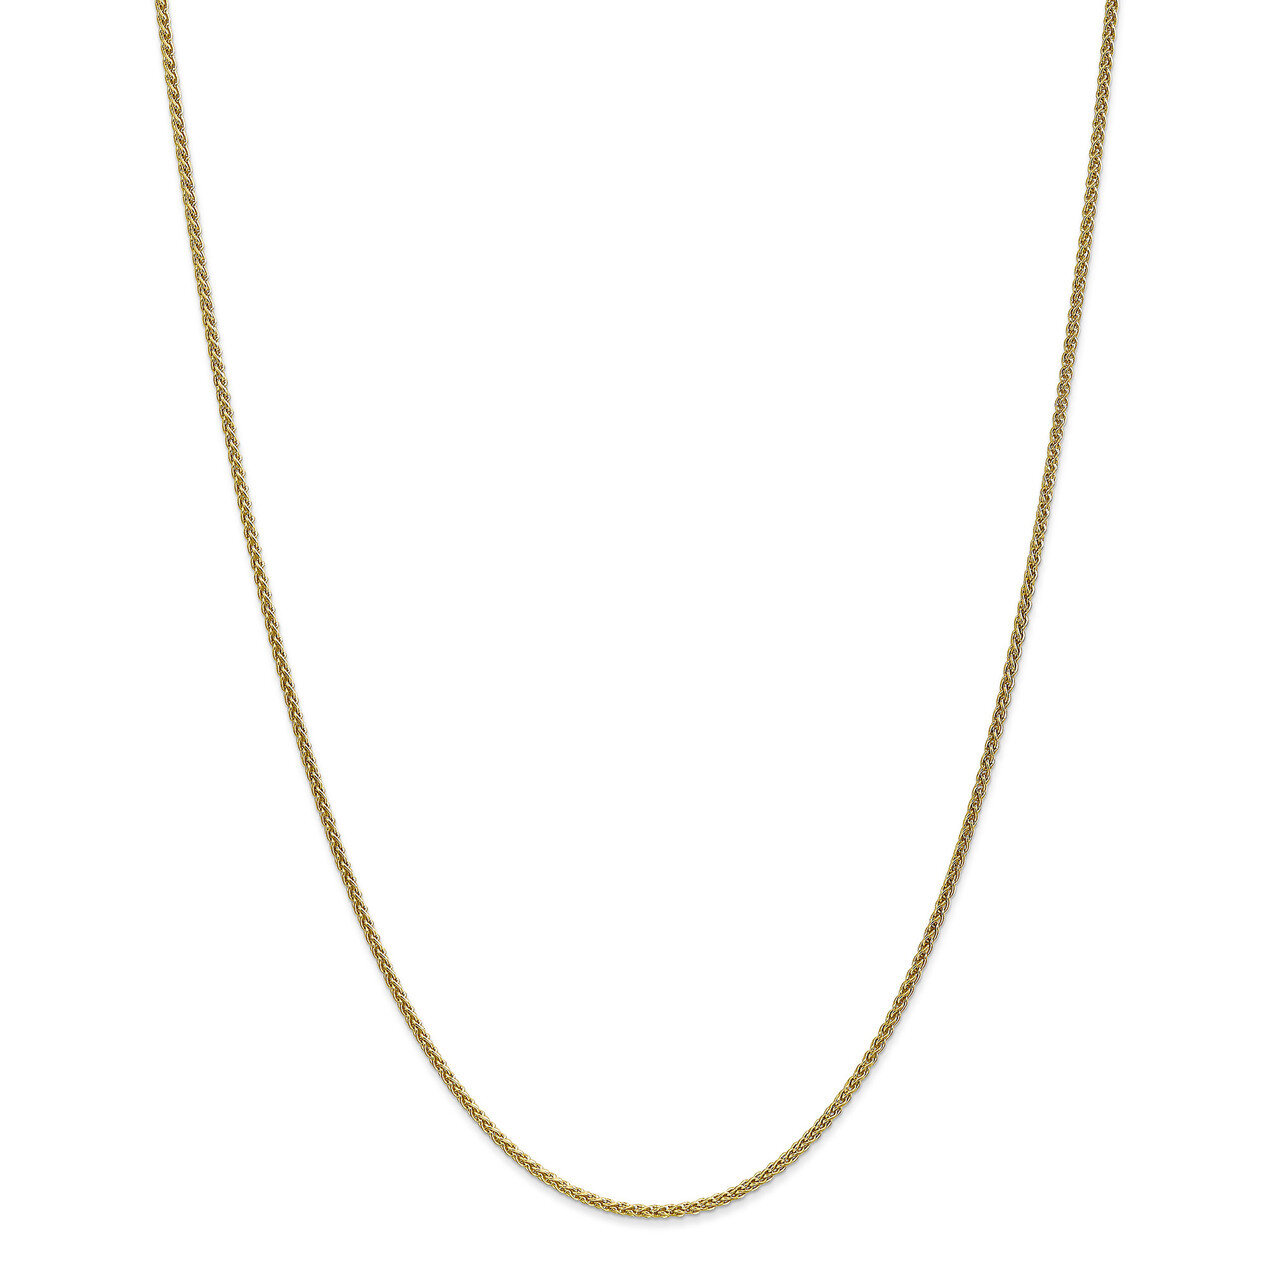 18 Inch 1.65mm Solid Polished Spiga Chain 10k Gold 10SPG040-18